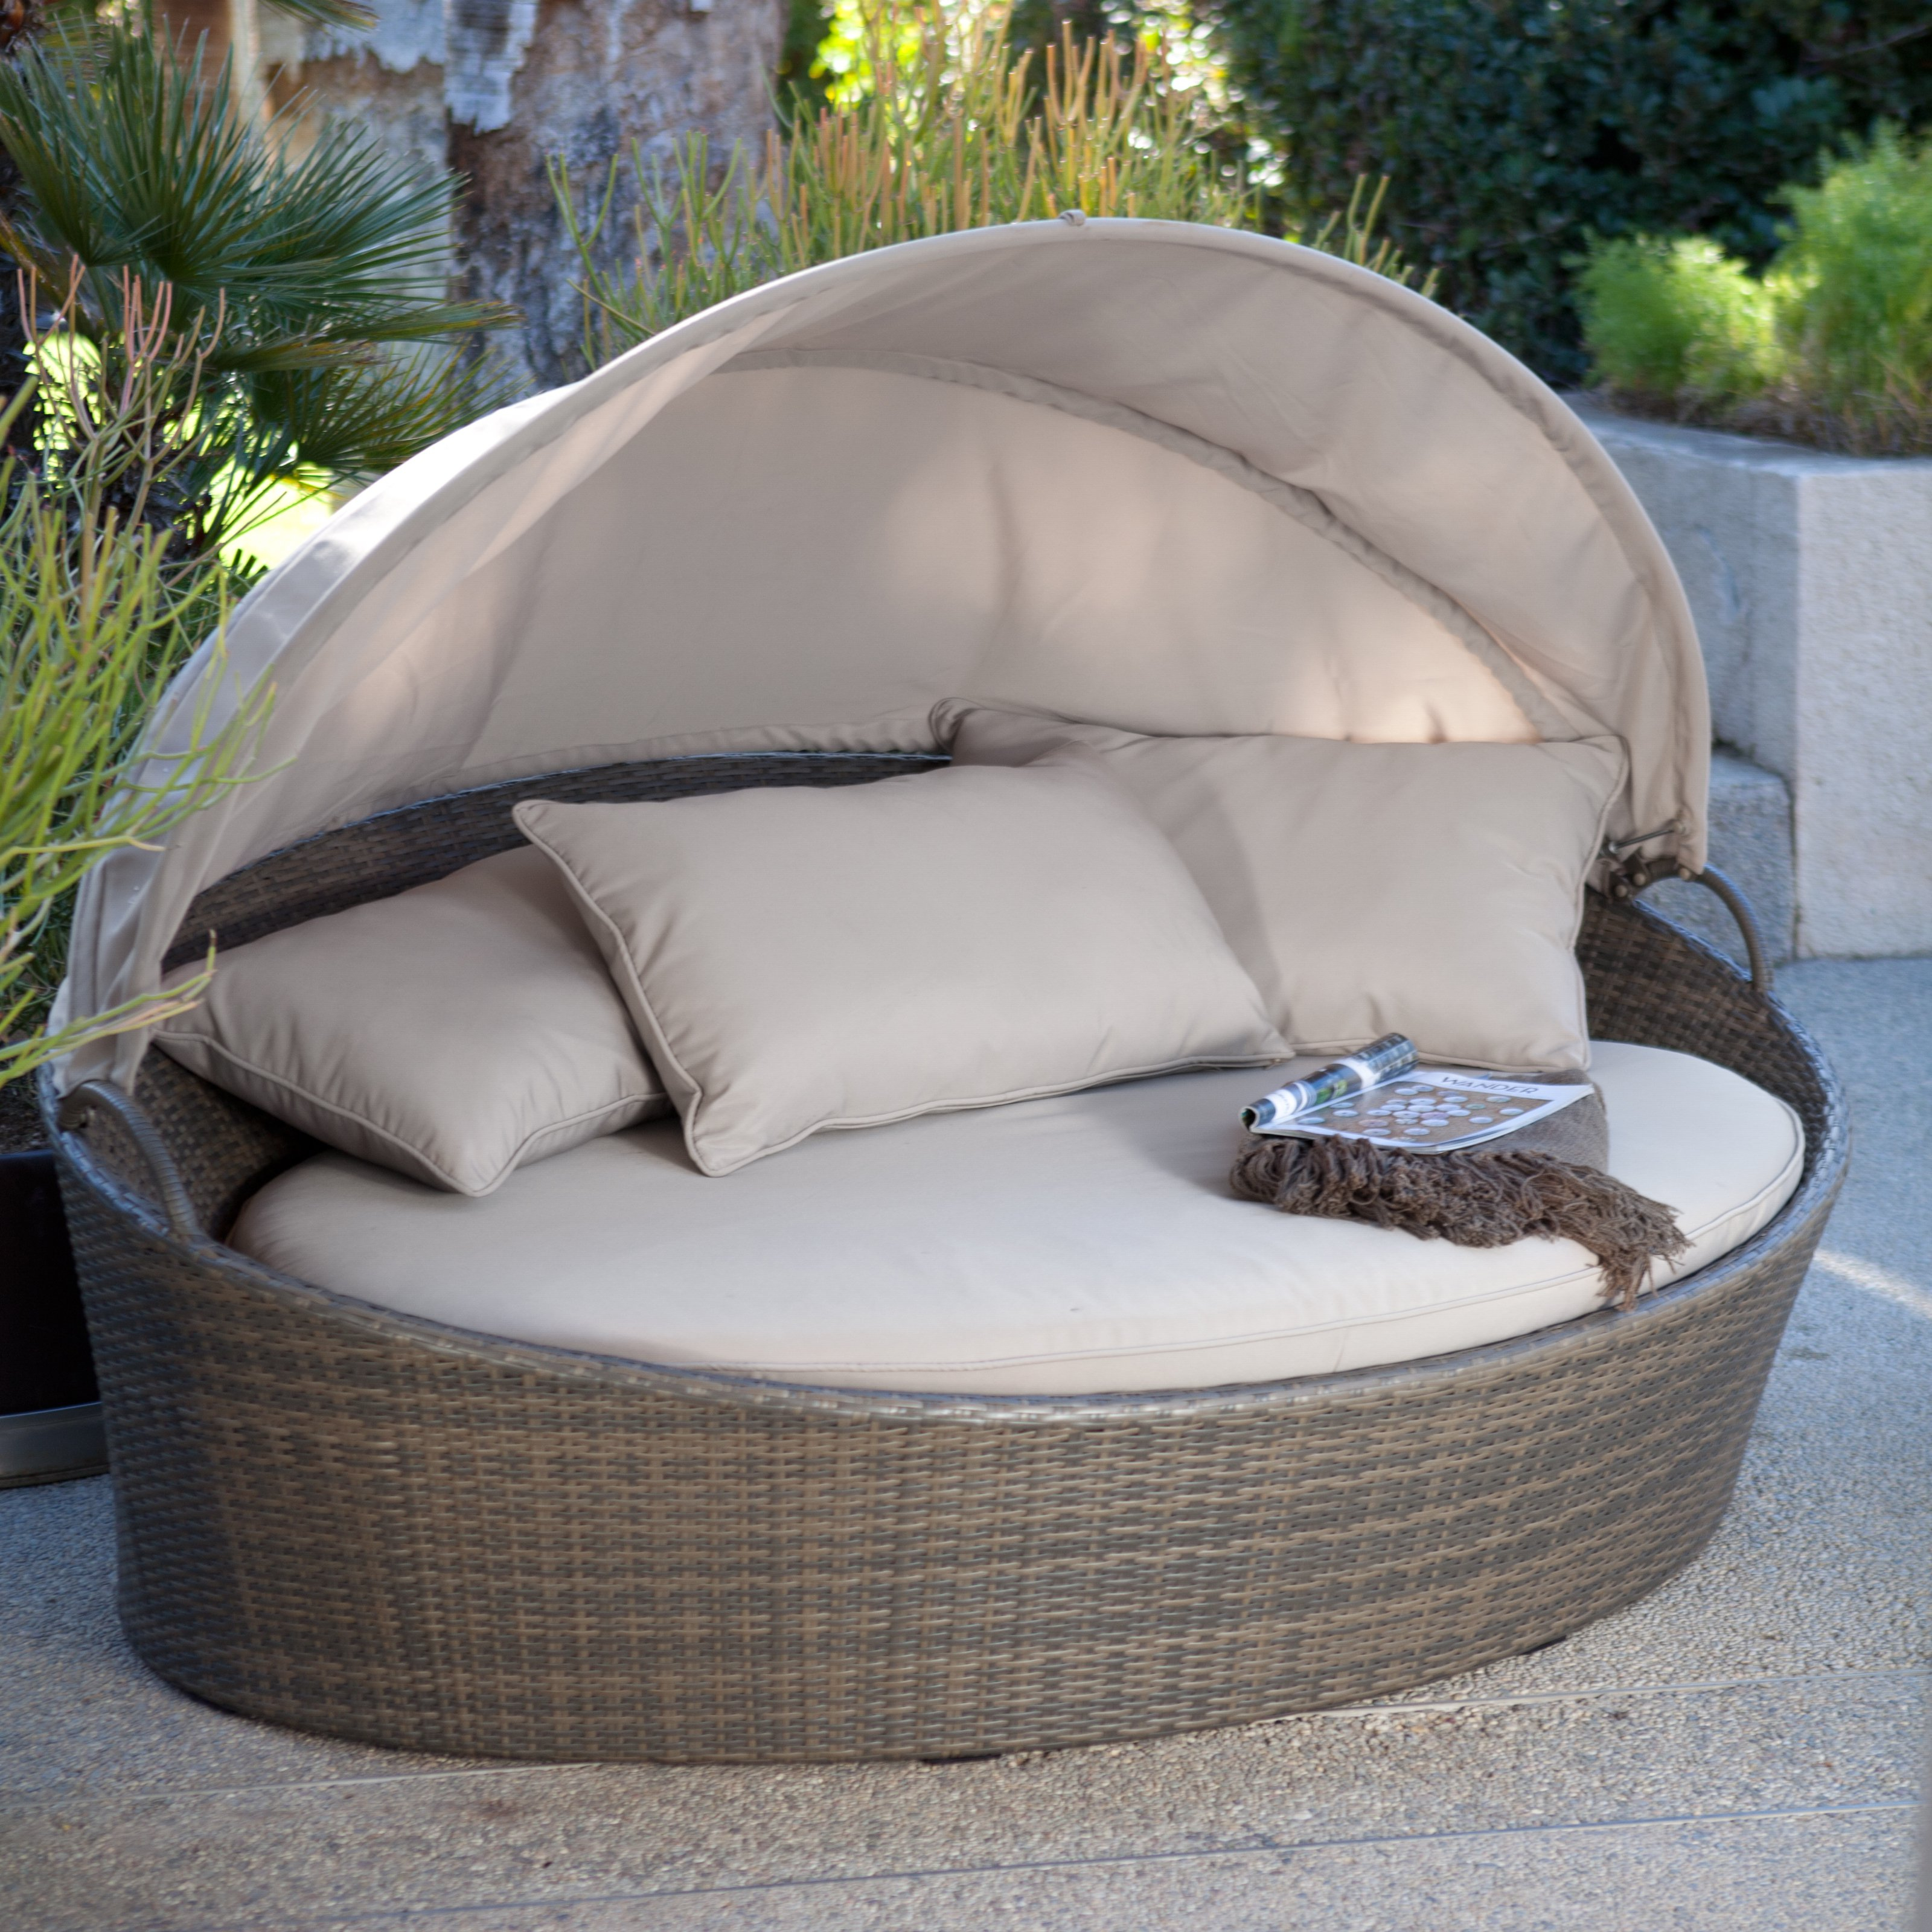 Outdoor Rattan Day Bed Lounger Rattan Day Bed With Canopy Wooden regarding dimensions 3200 X 3200